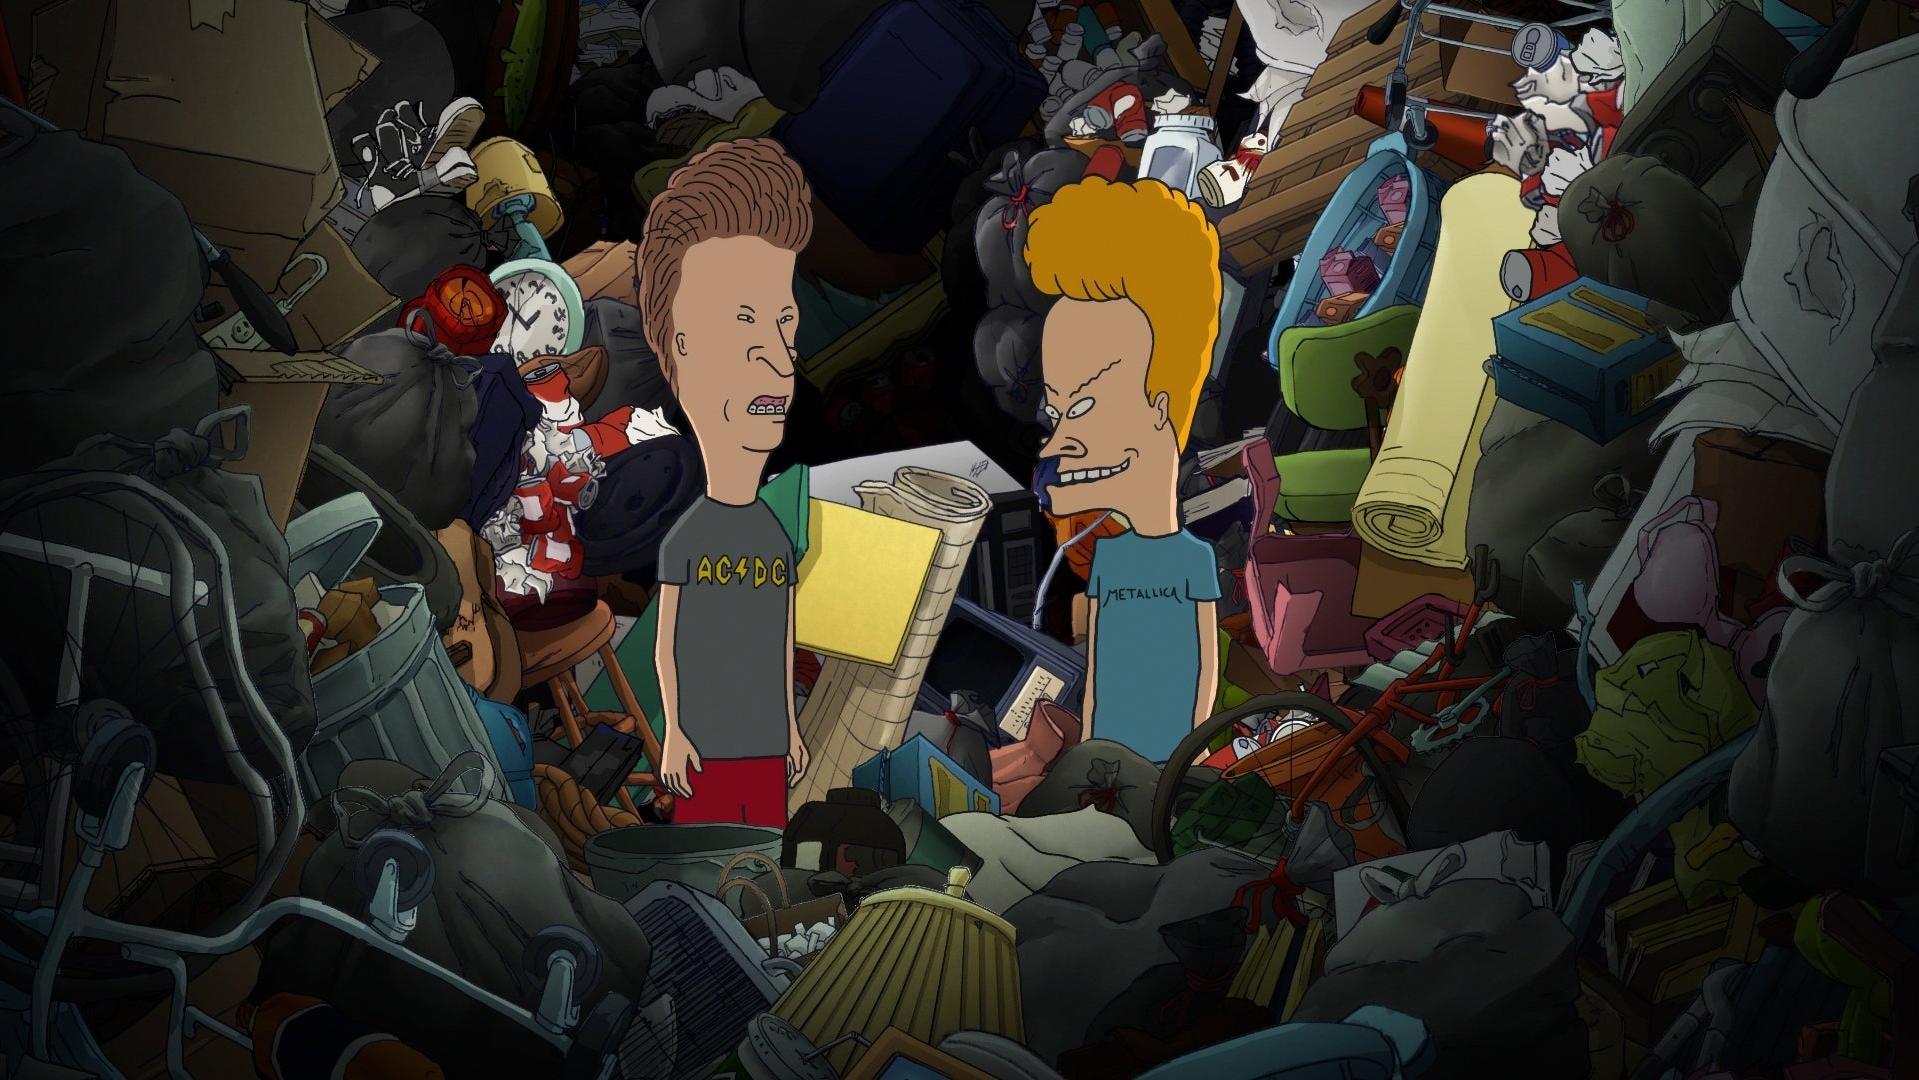 Beavis And Butt-Head renewed, moving from streaming to Comedy Central